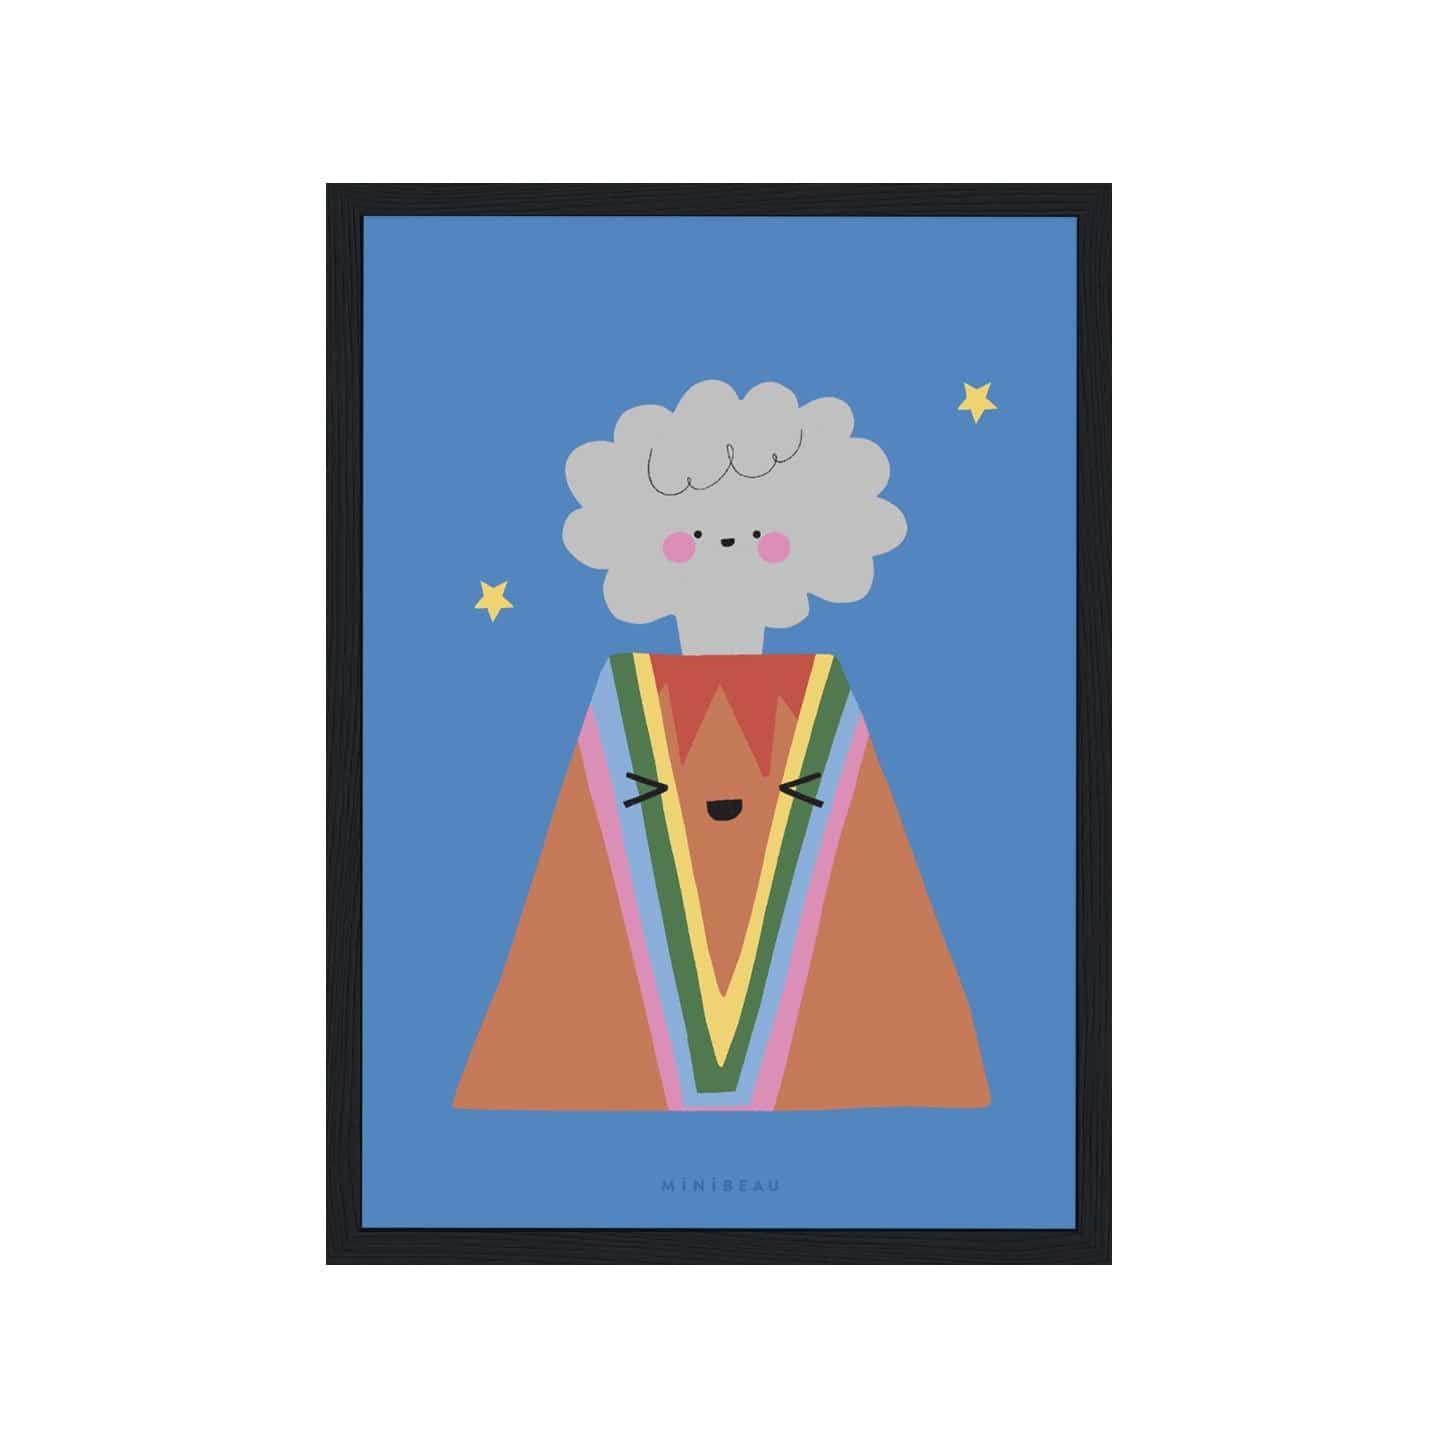 Art print in black frame. Our Happy Alphabet 'V' Art Print shows an erupting volcanow with a smiling plume of smoke and the lava in rainbow colours running down the volcano, forming a V on a blue background with stars.